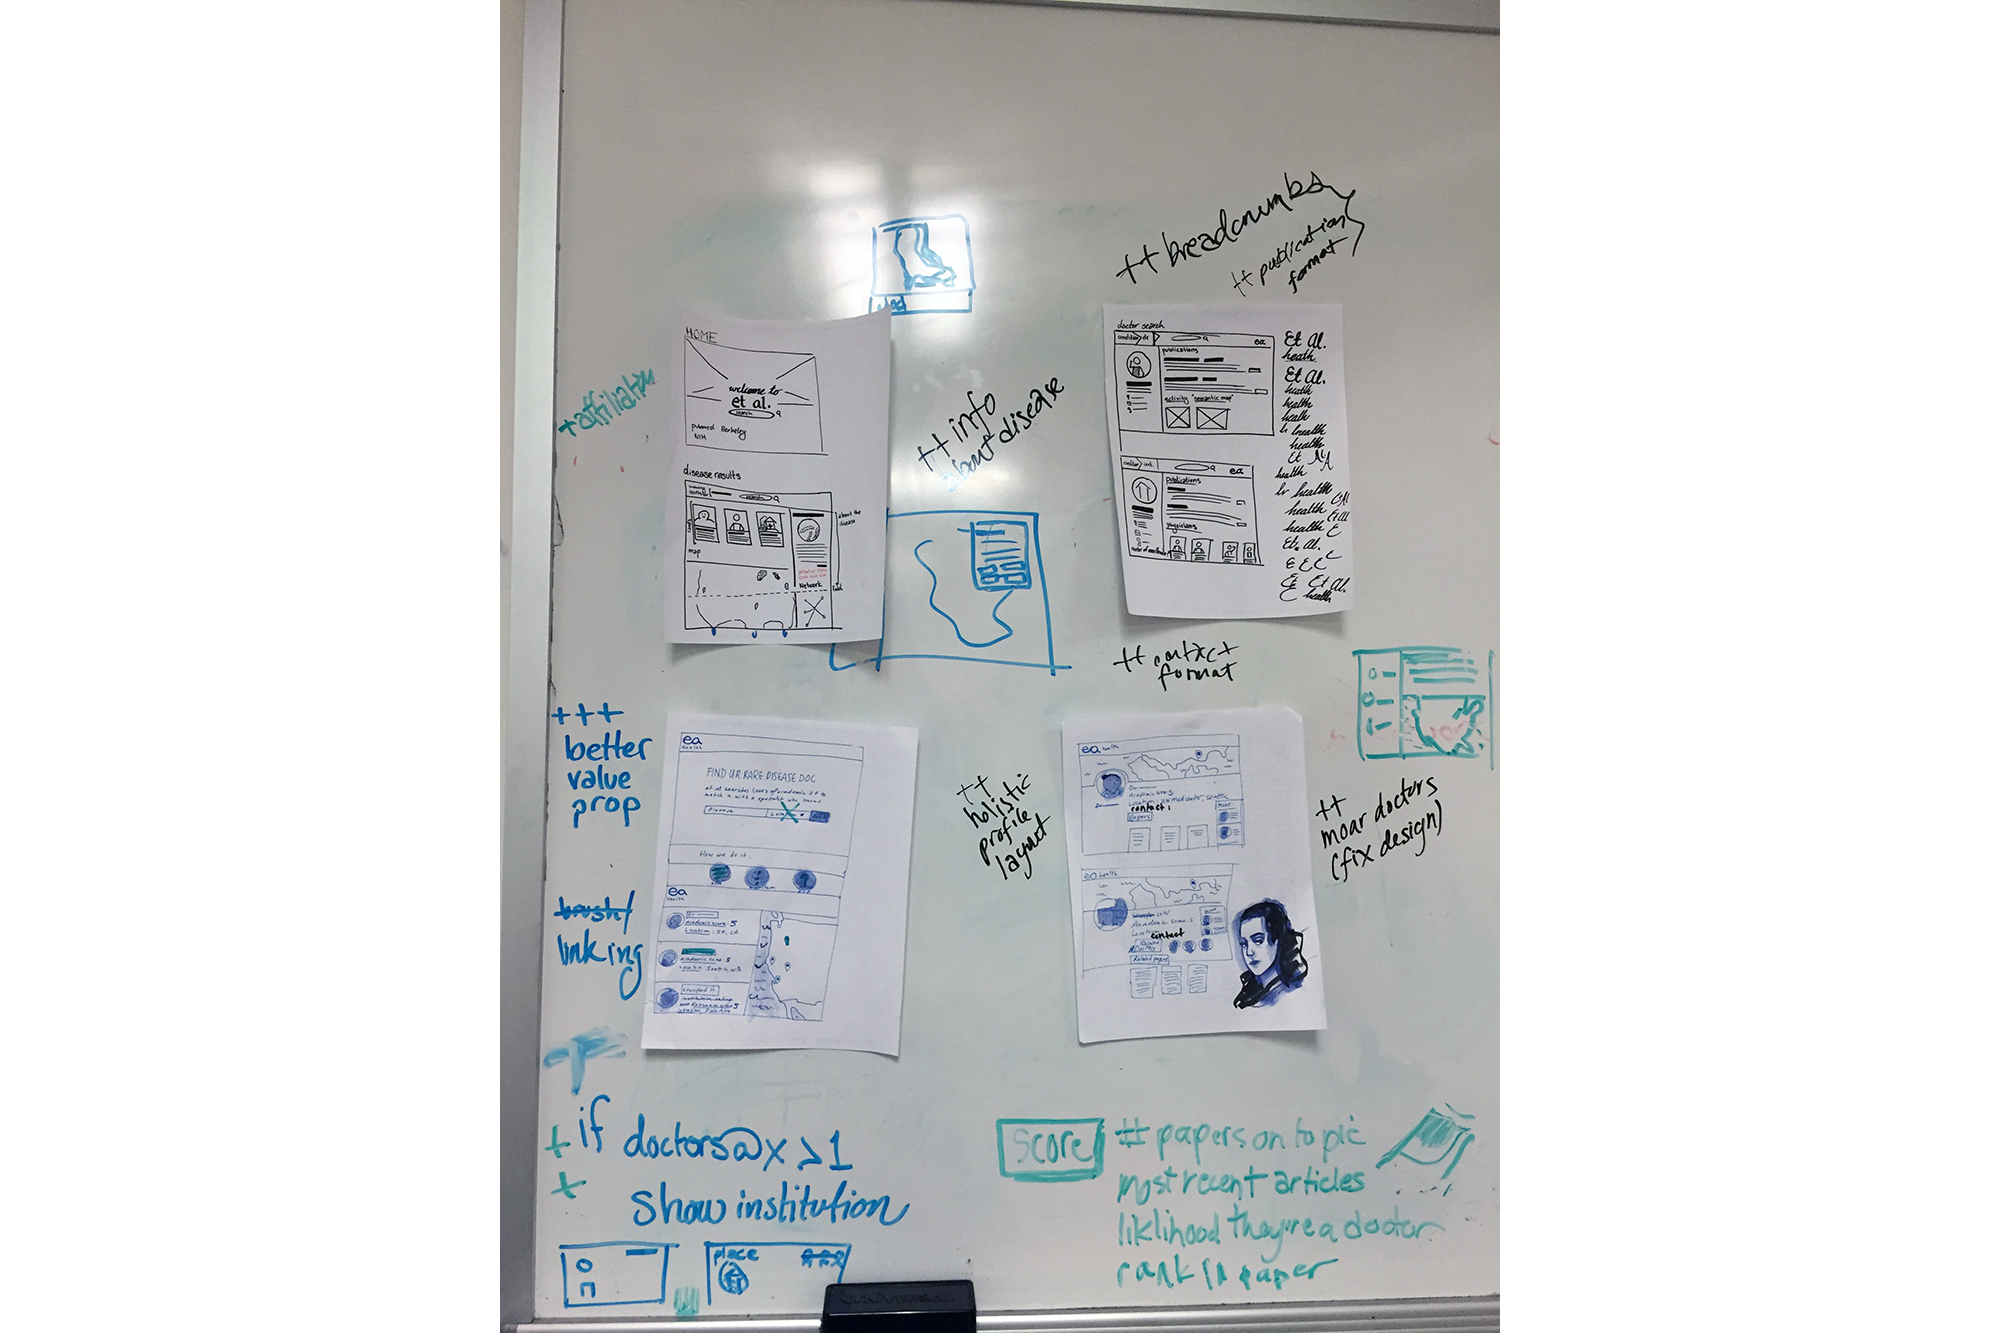 various sketches on a whiteboard with annotations